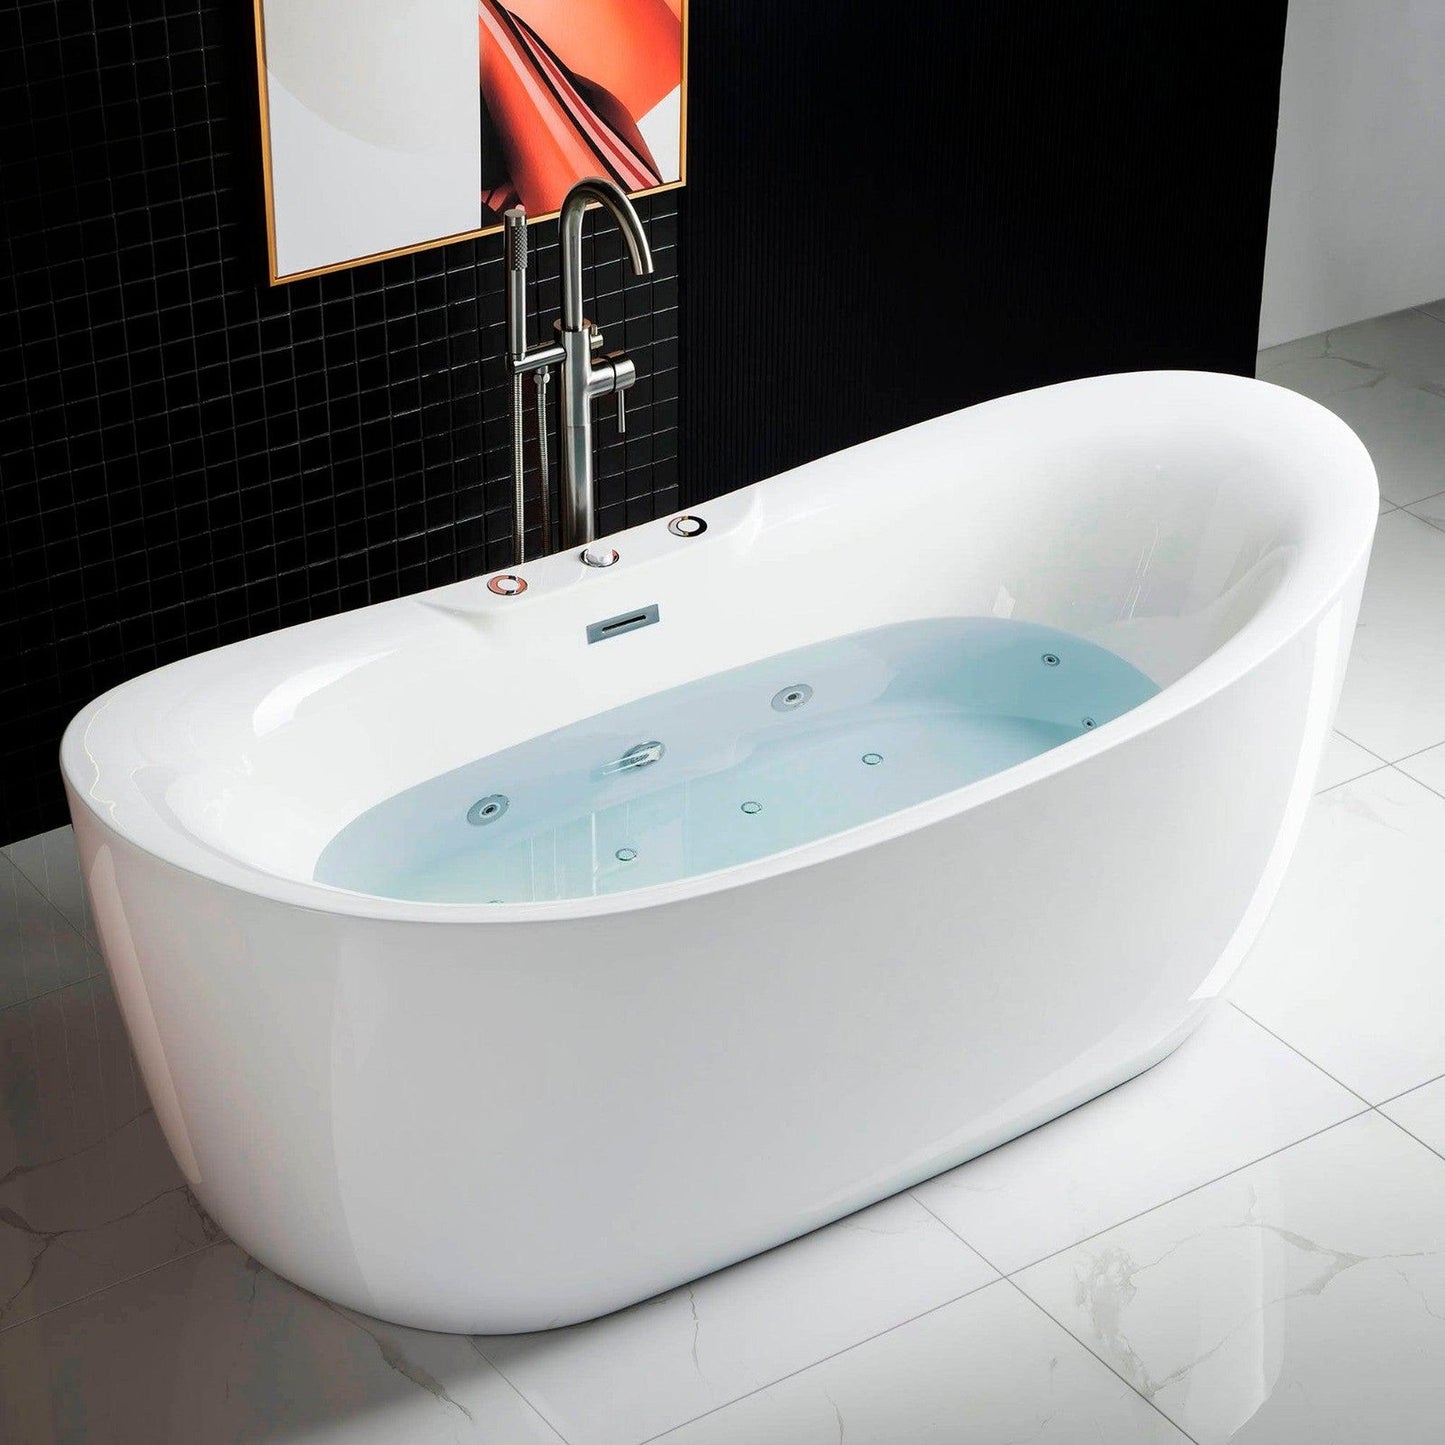 WoodBridge 71" White Whirlpool Water Jetted and Air Bubble Freestanding Bathtub